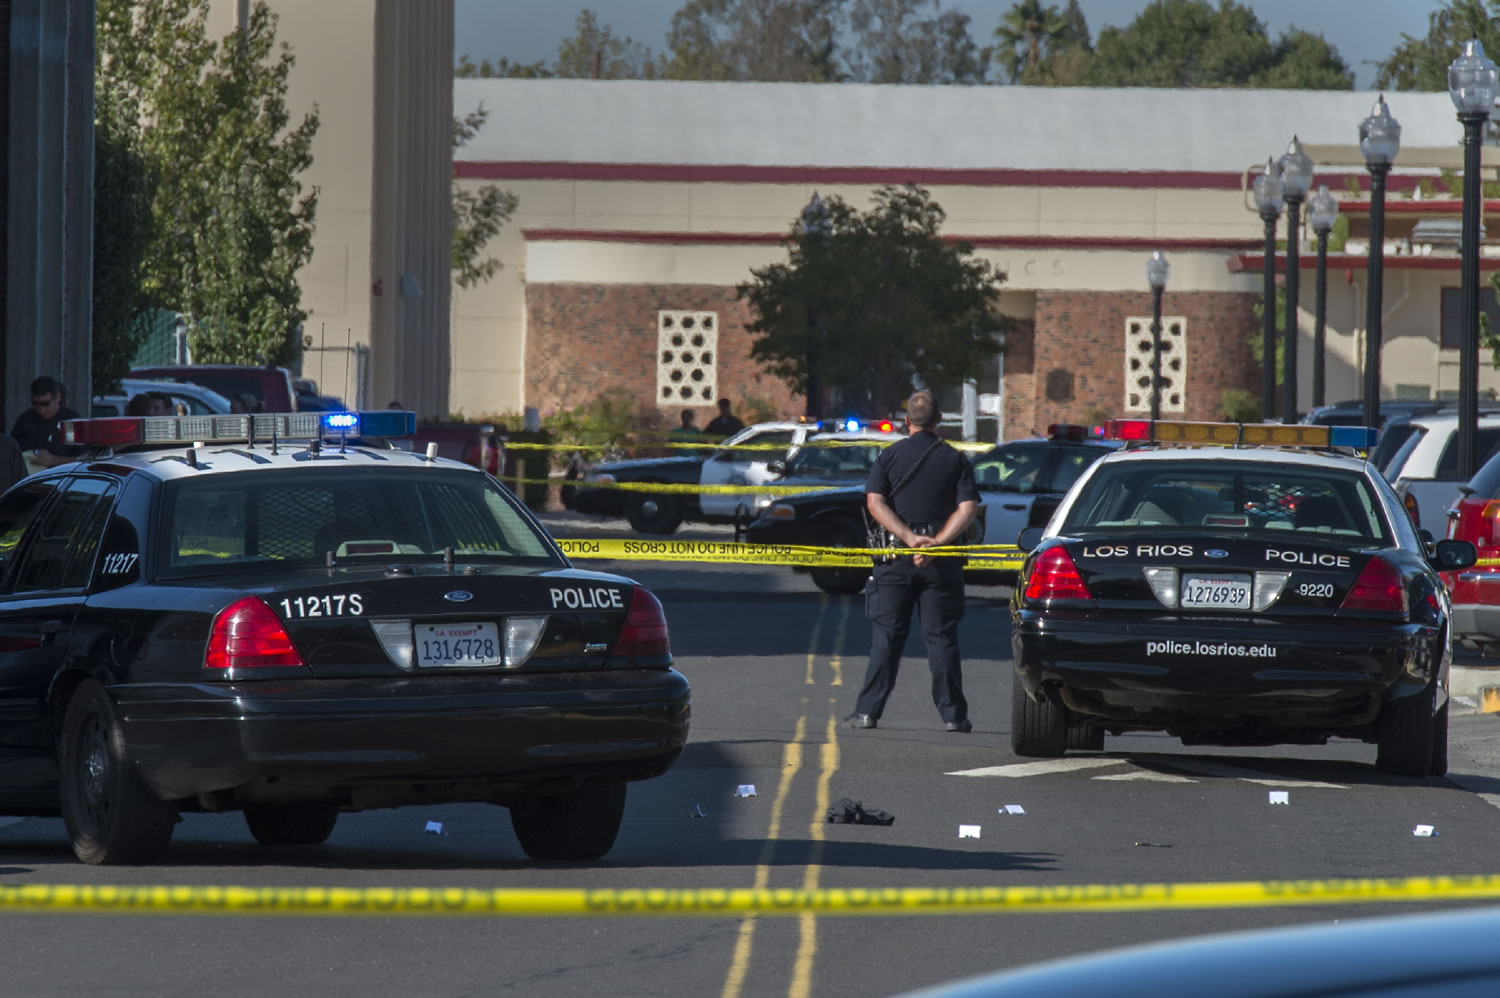 A police officer stands guard as Sacramento City College is on lockdown while police search the area after a shooting, Thursday, Sept. 3, 2015, in Sacramento, Calif. The shooting occurred in a parking lot near the baseball field on the college campus. (Ren&Egrave;e C.